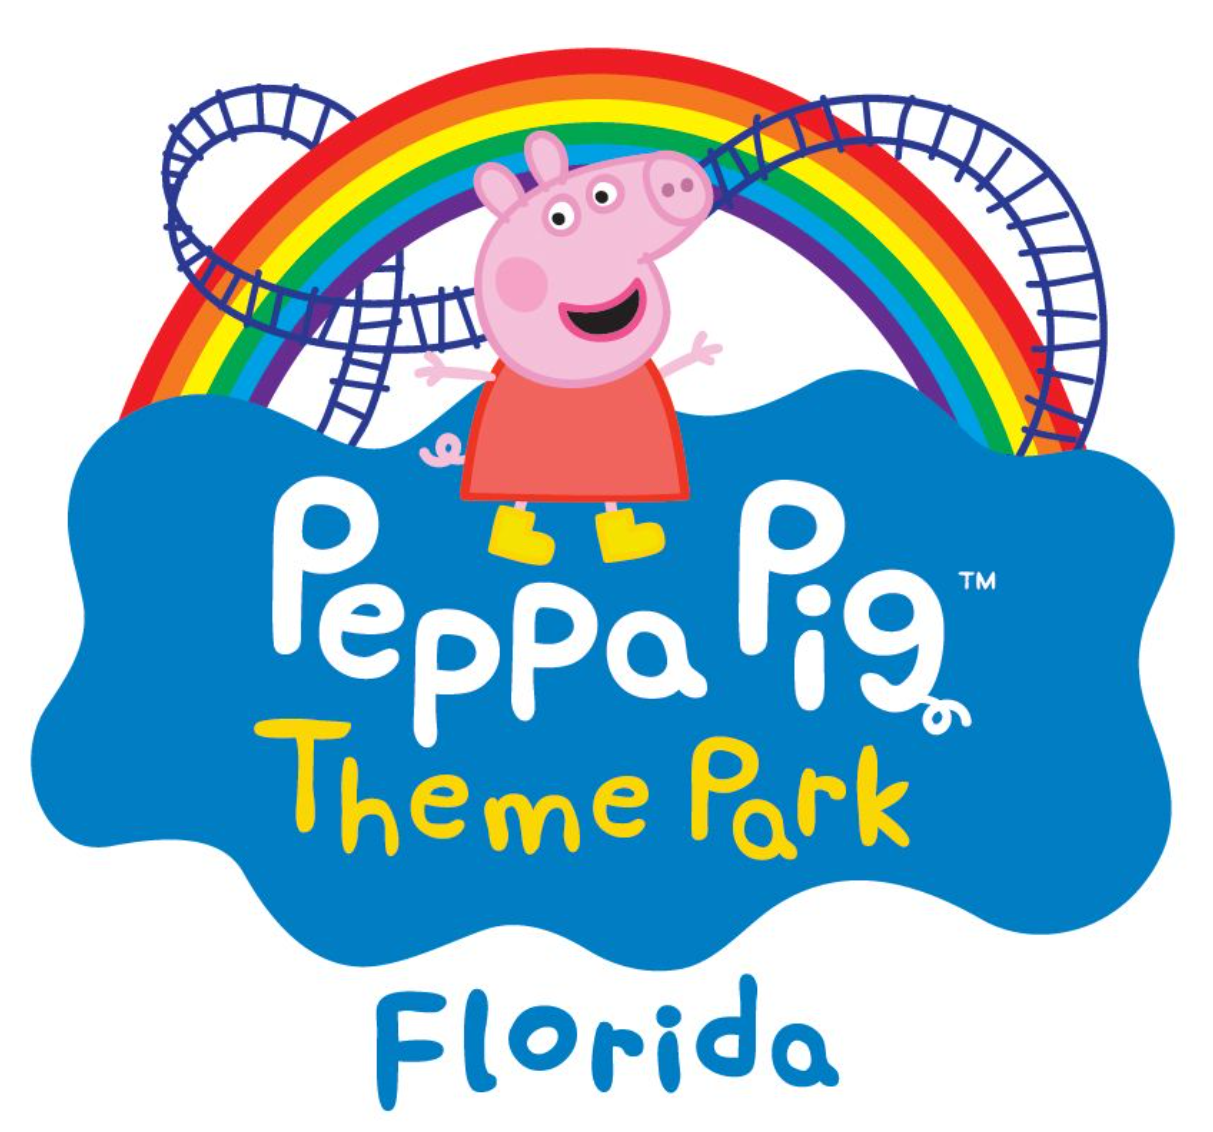 World's first Peppa Pig theme park is coming to Florida!